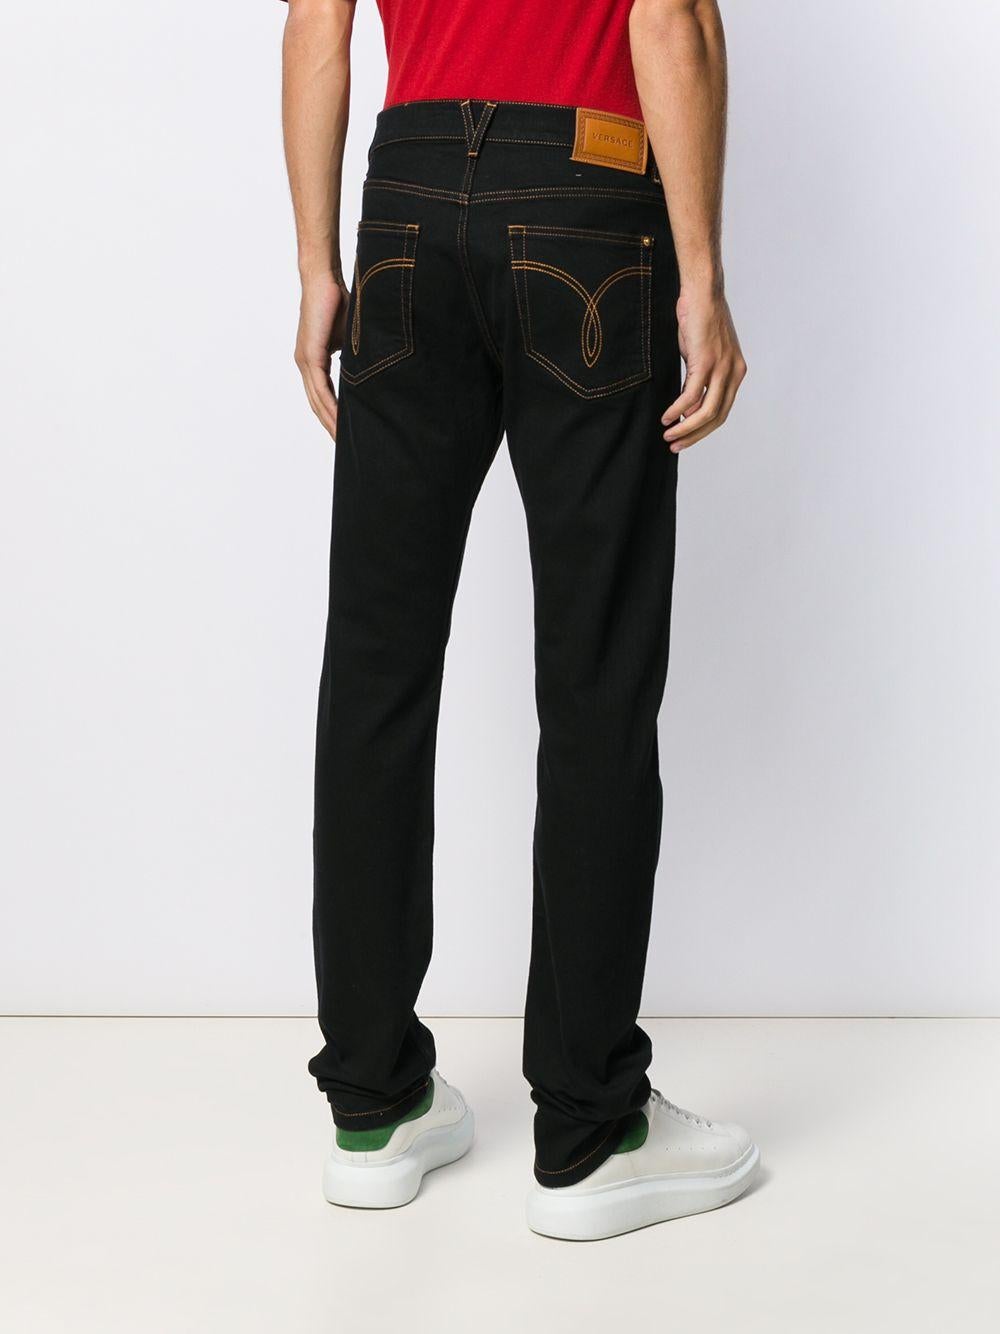 black and gold jeans mens